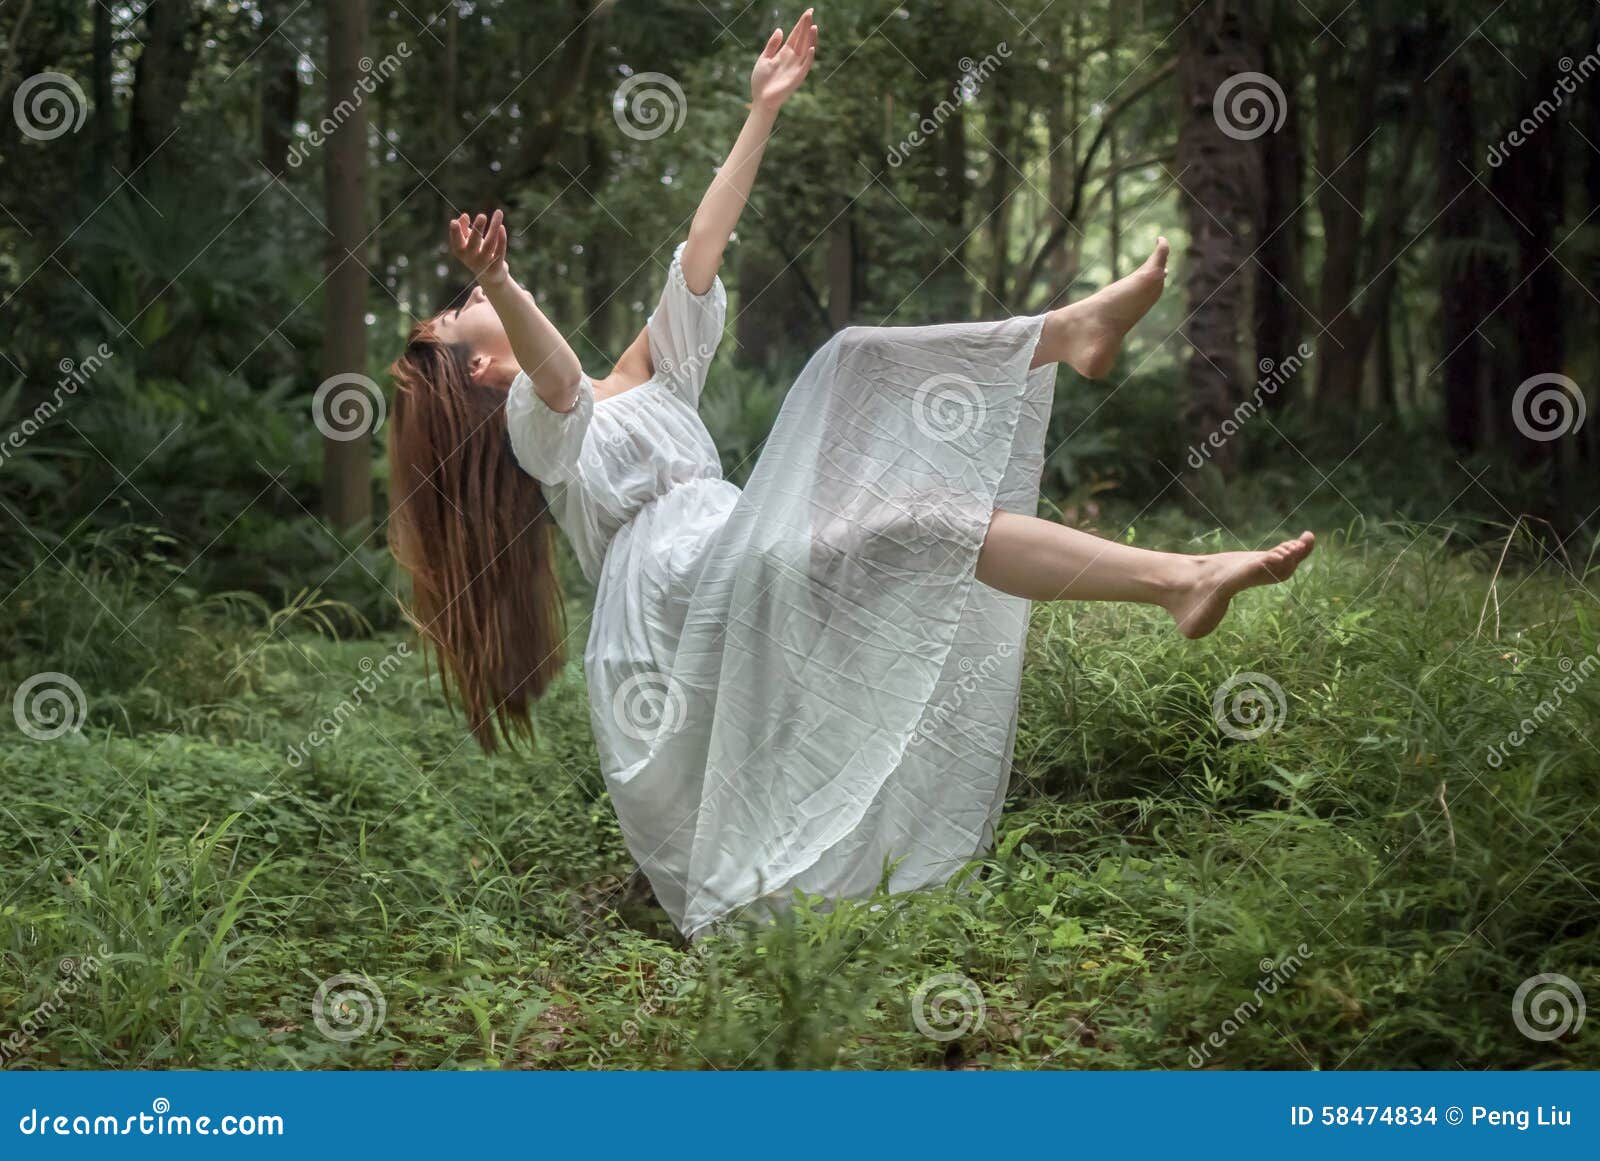 floating girl in forest